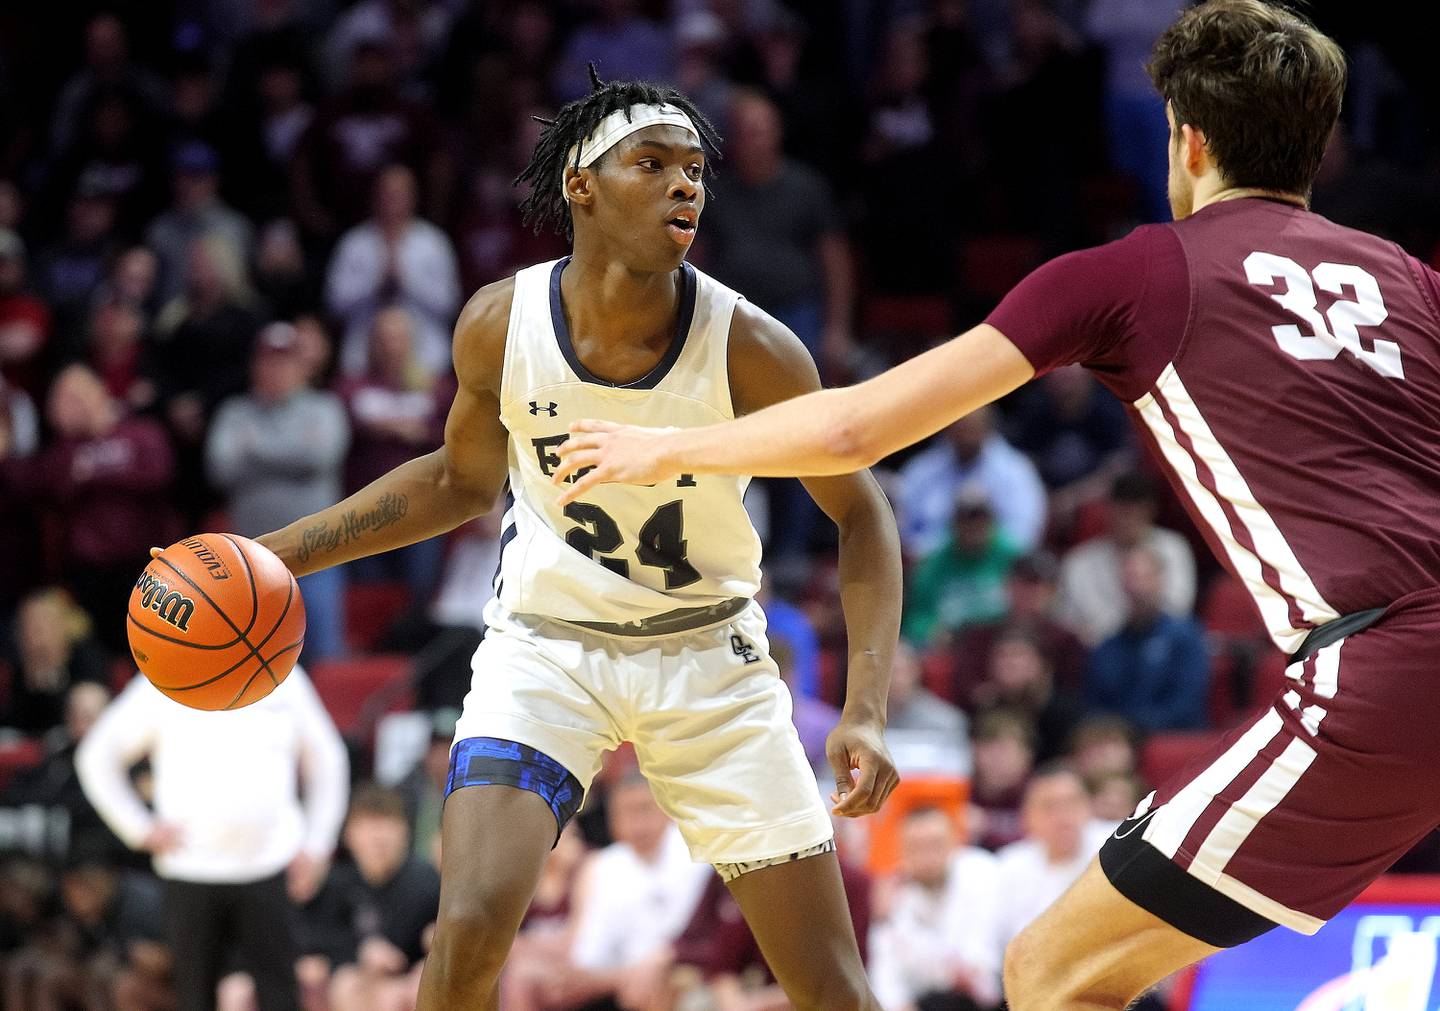 Oswego East's Mekhi Lowery looks for an open teammate in the second half of his team's supersectional game against Moline. The Wolves fell 59-55 to the Maroons ending this season Class 4A postseason run.    (Photo: PhotoNews Media/Clark Brooks)